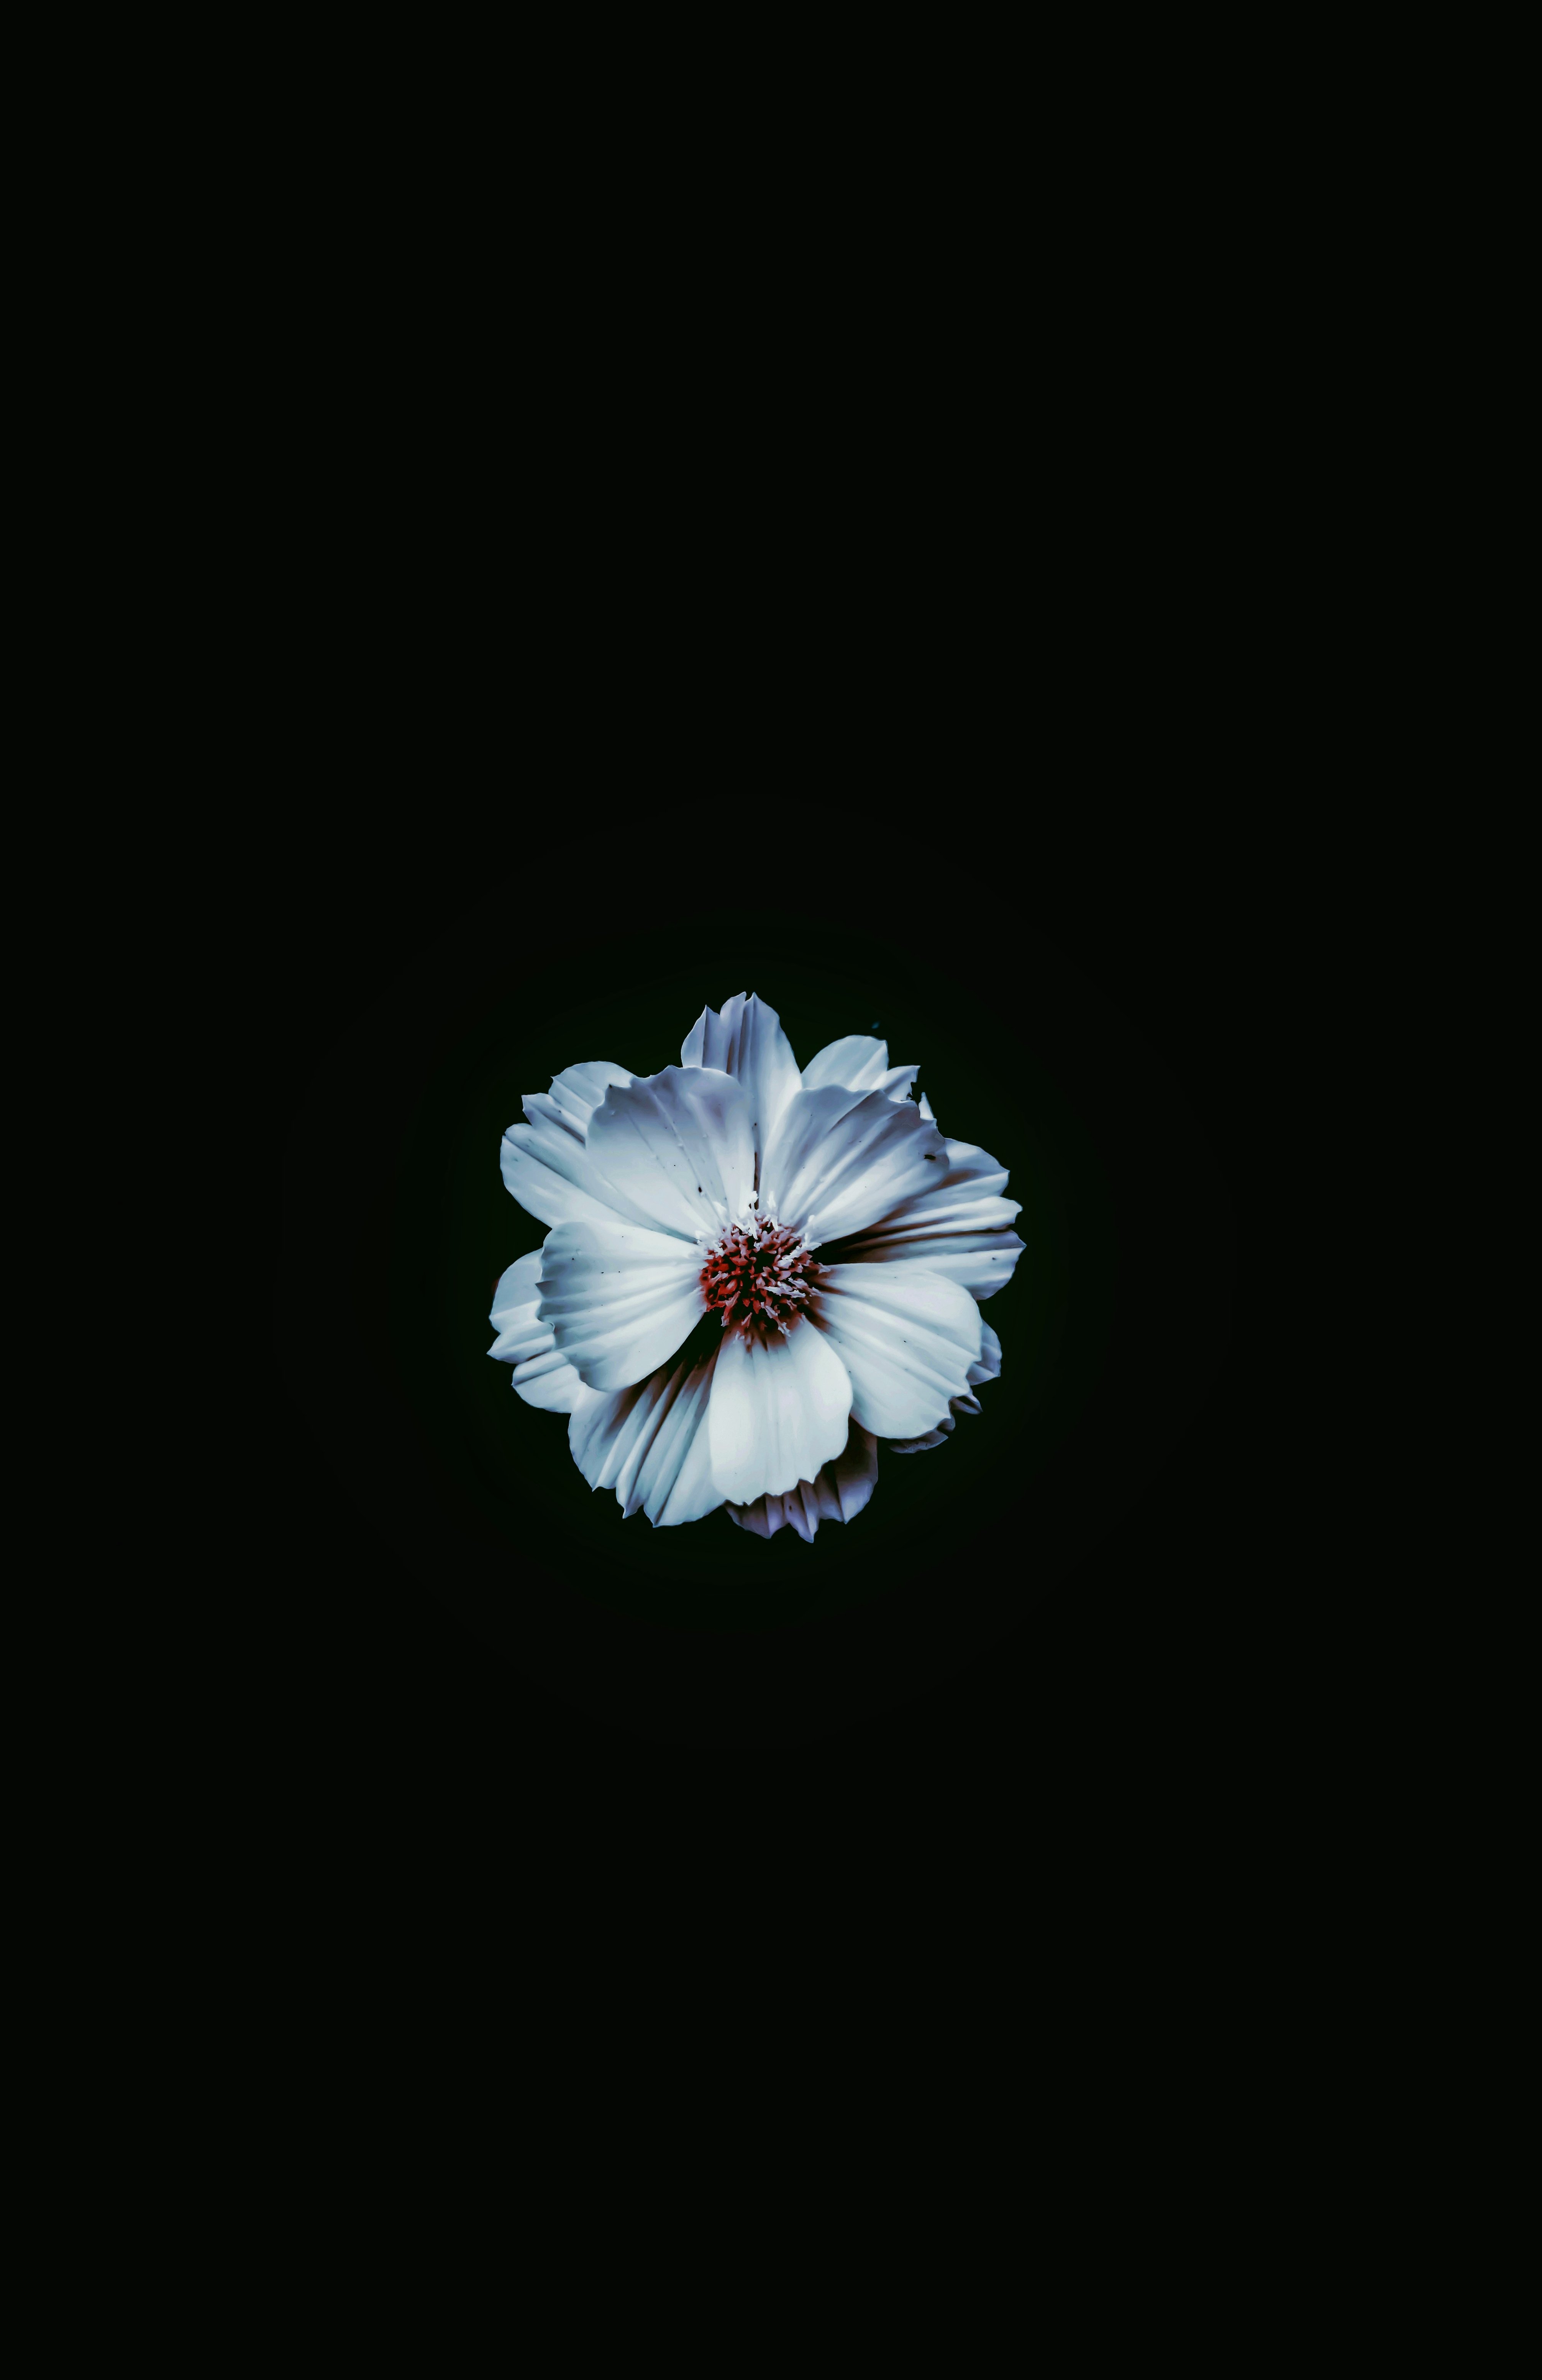 White Flower With Black Background · Free